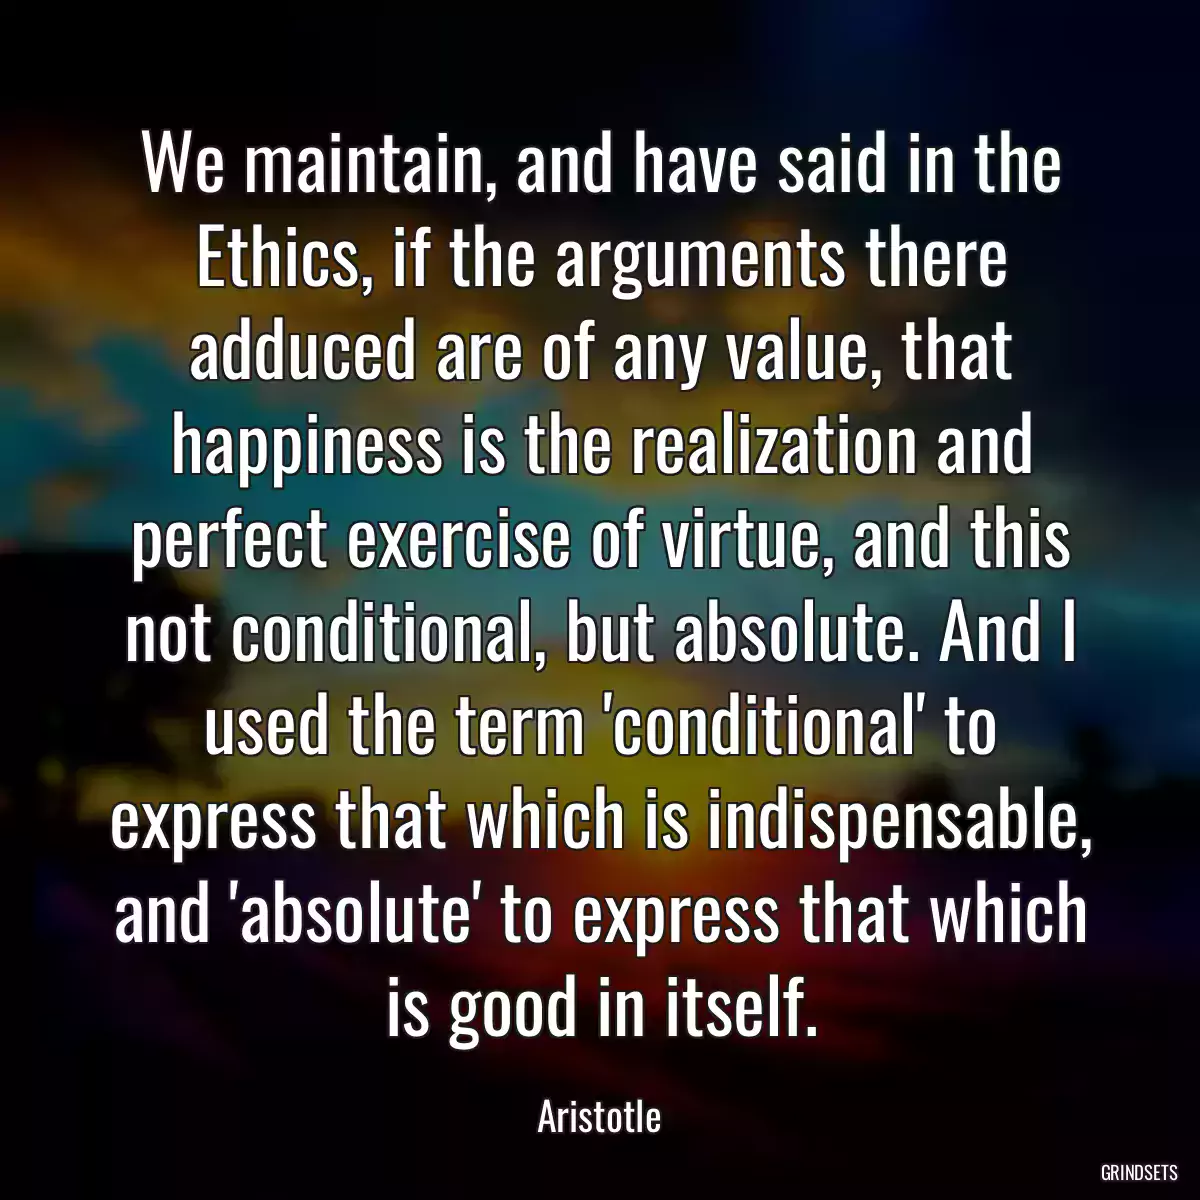 We maintain, and have said in the Ethics, if the arguments there adduced are of any value, that happiness is the realization and perfect exercise of virtue, and this not conditional, but absolute. And I used the term \'conditional\' to express that which is indispensable, and \'absolute\' to express that which is good in itself.